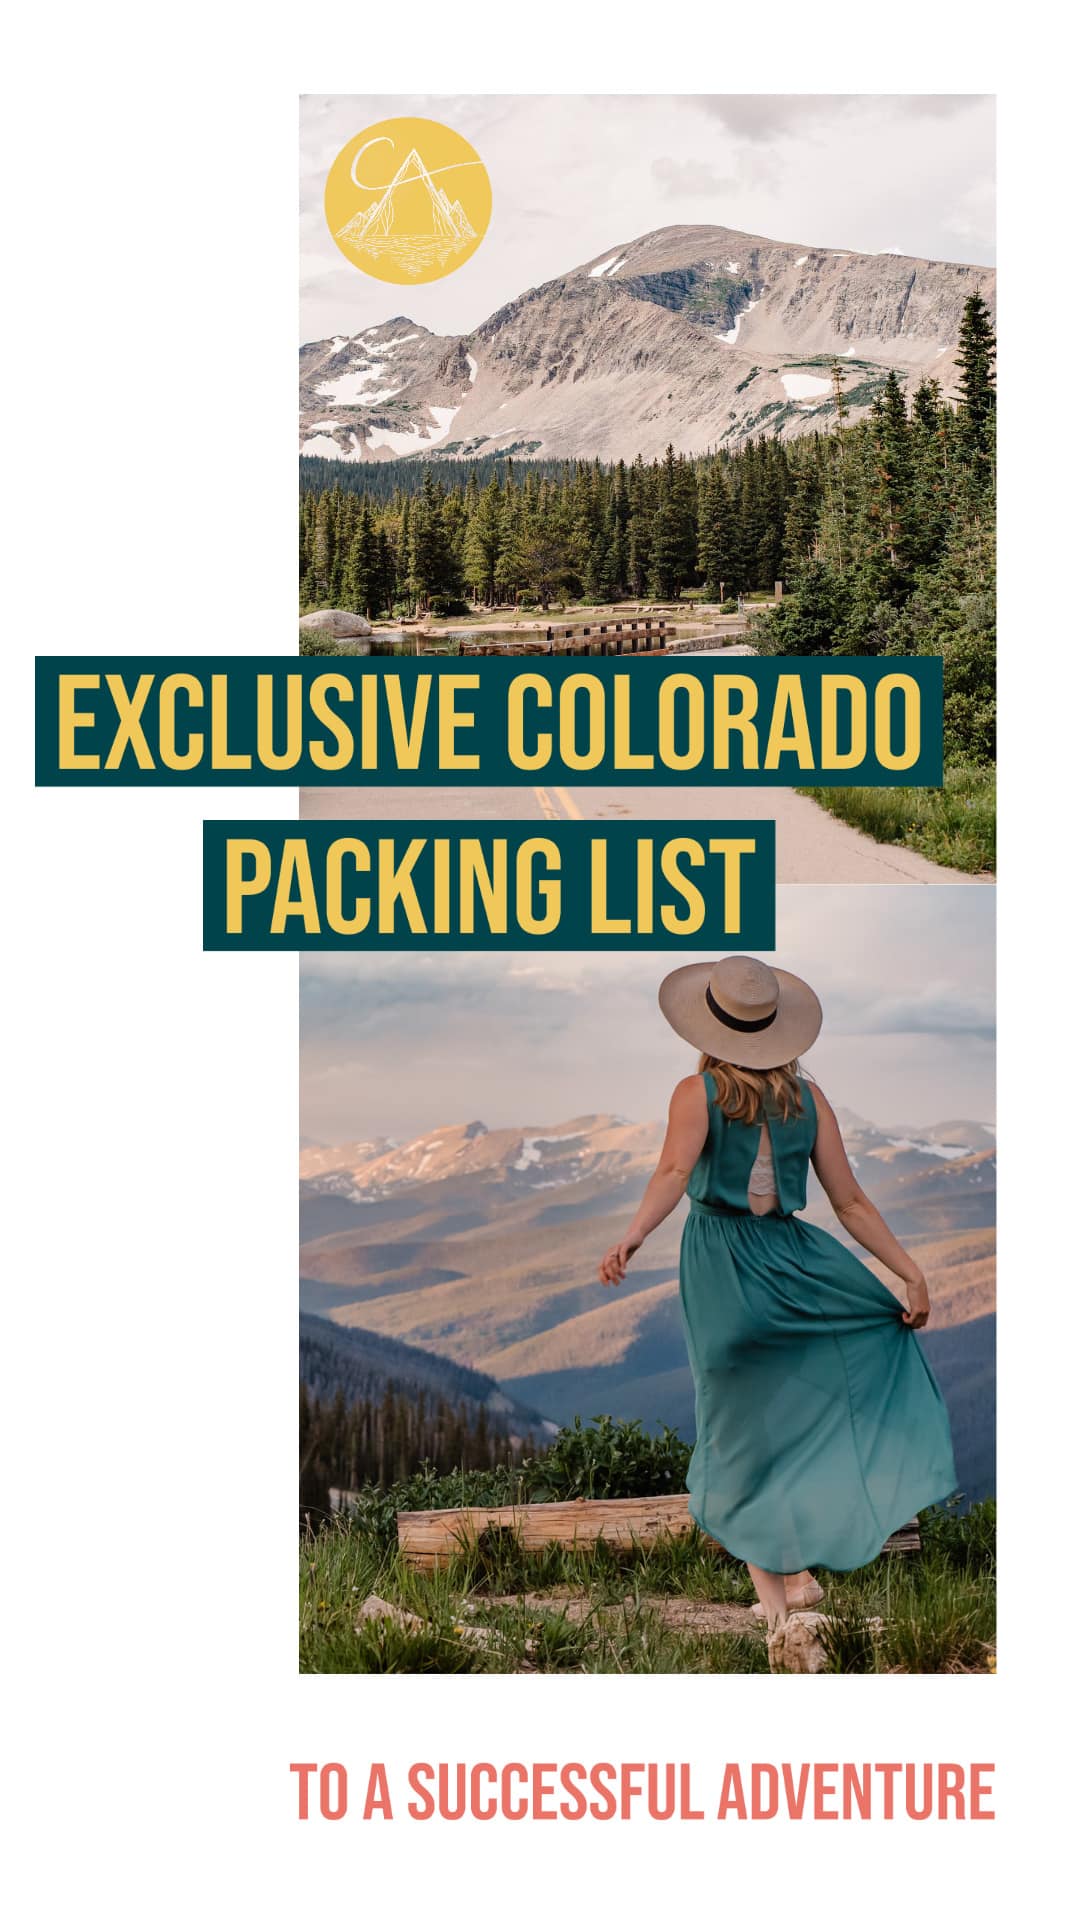 Exclusive Colorado Packing List to a Successful Adventure